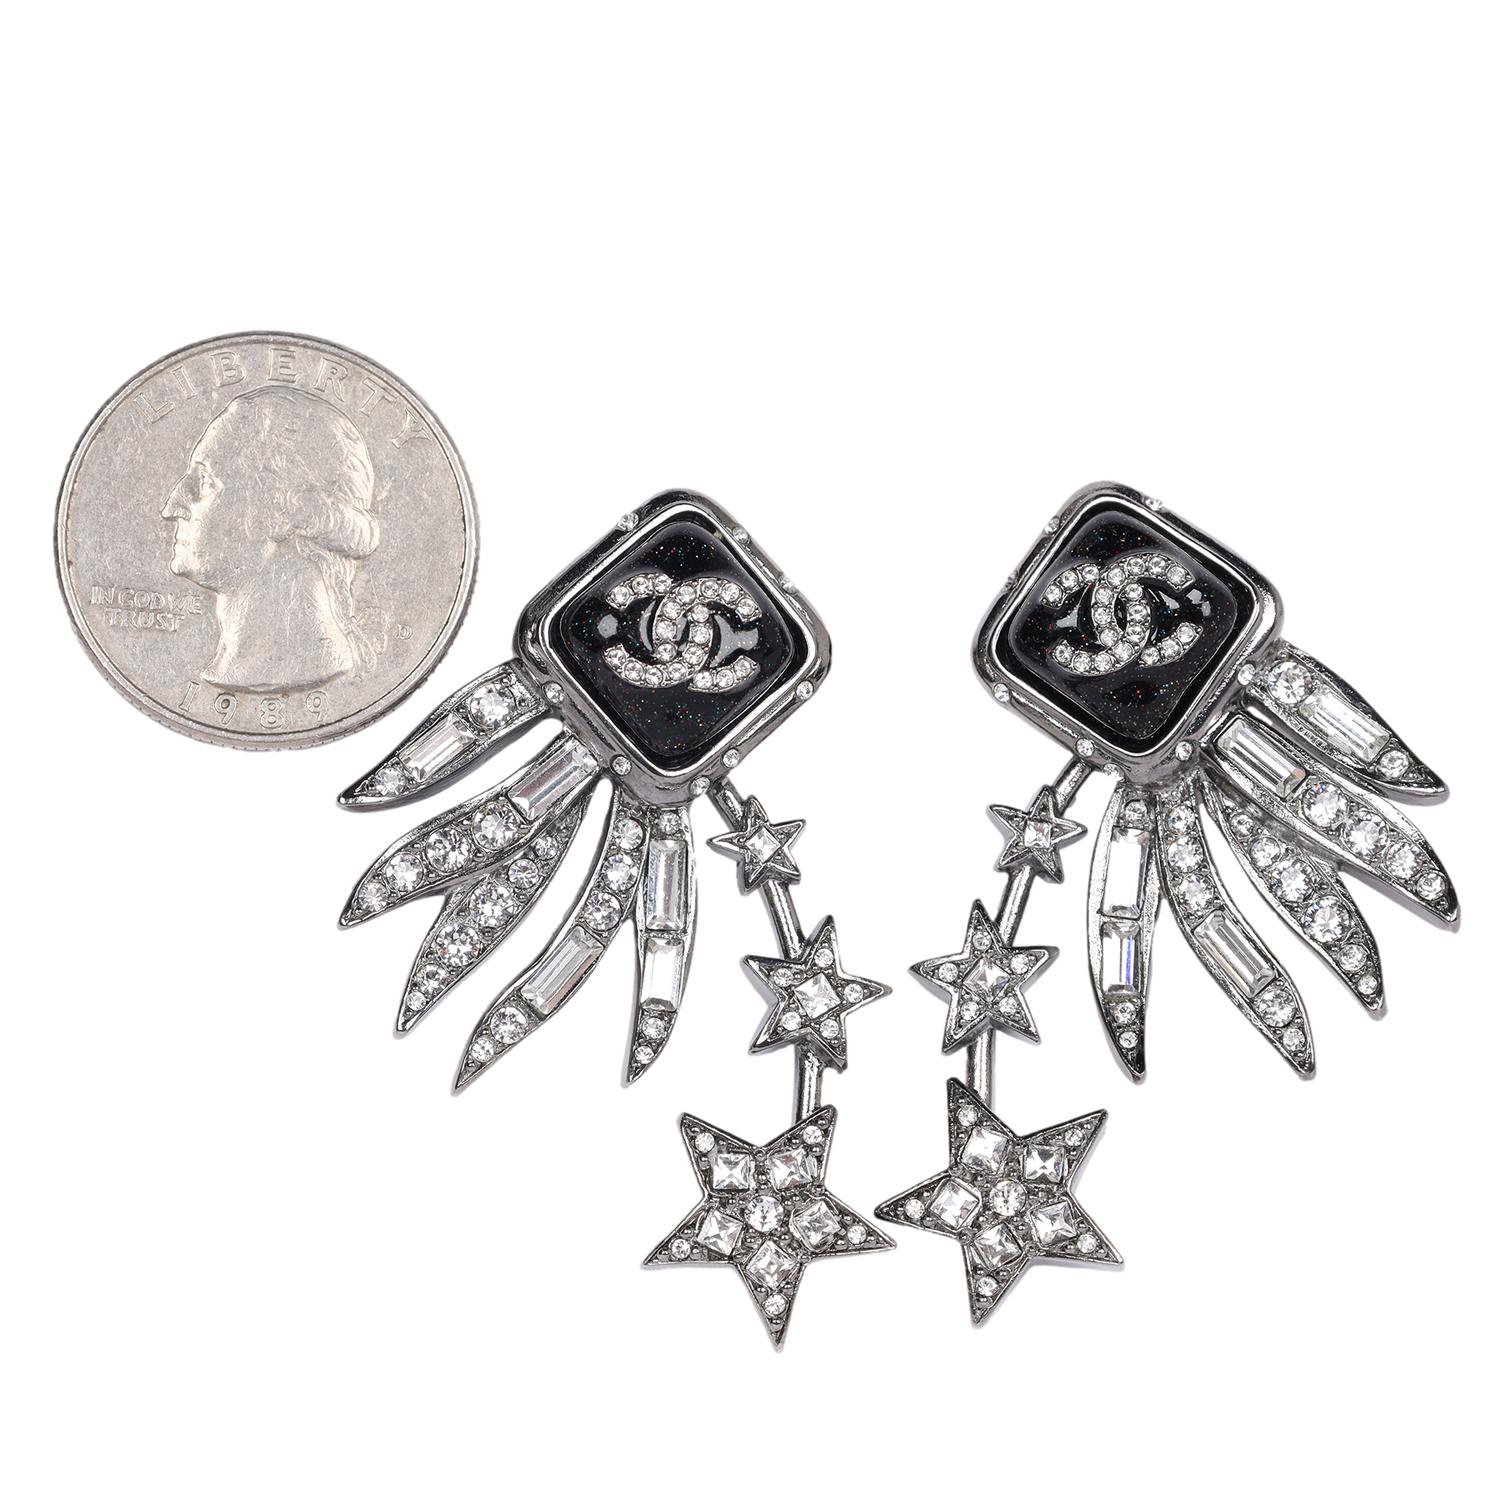 Authentic, pre-loved Chanel iconic CC logo silver star rhinestone chandelier pierced earrings. 

Made in France  Marked C21S

2.0